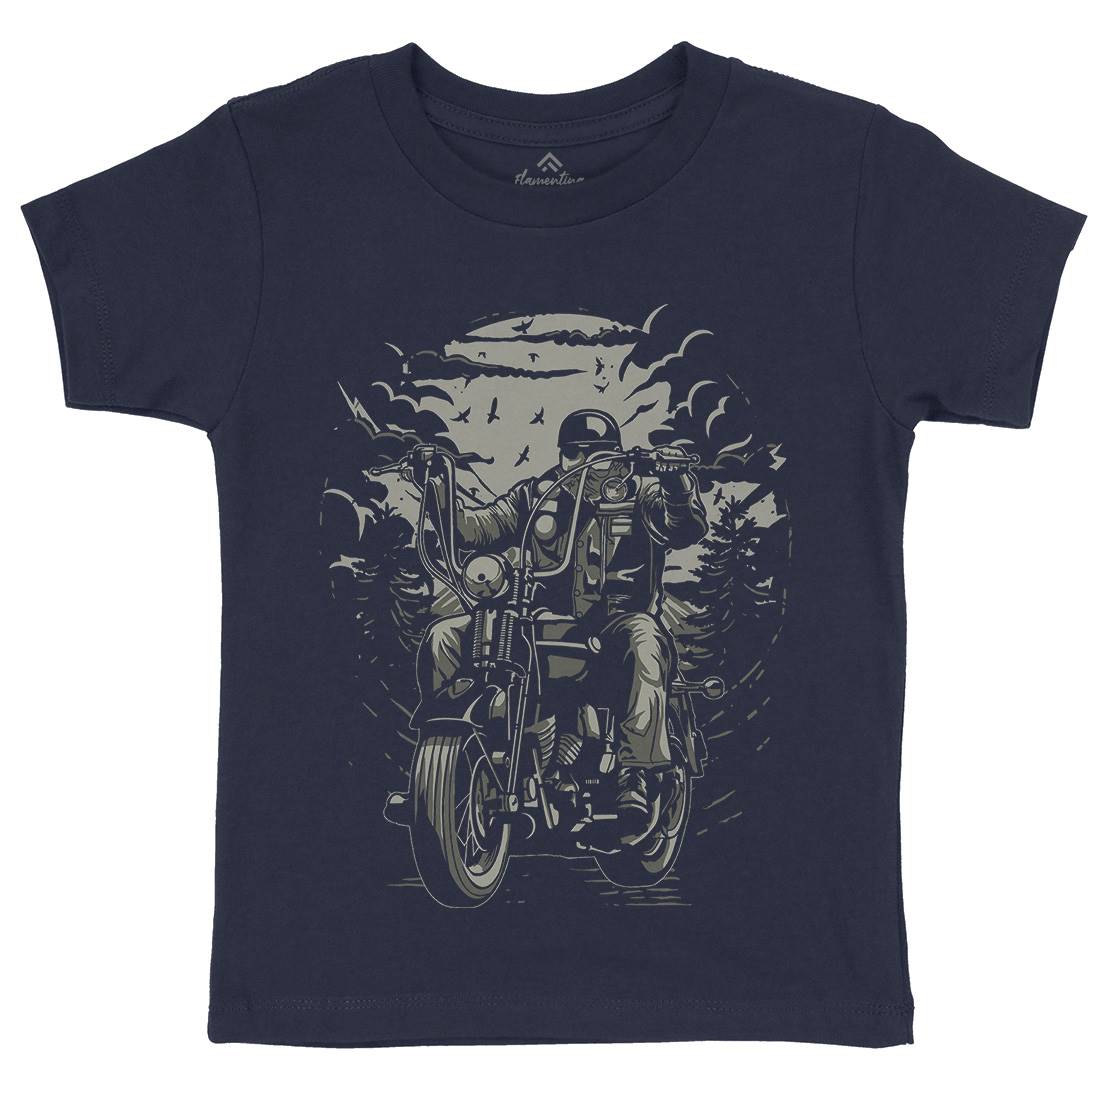 Live To Ride Motorcycle Kids Organic Crew Neck T-Shirt Horror A552